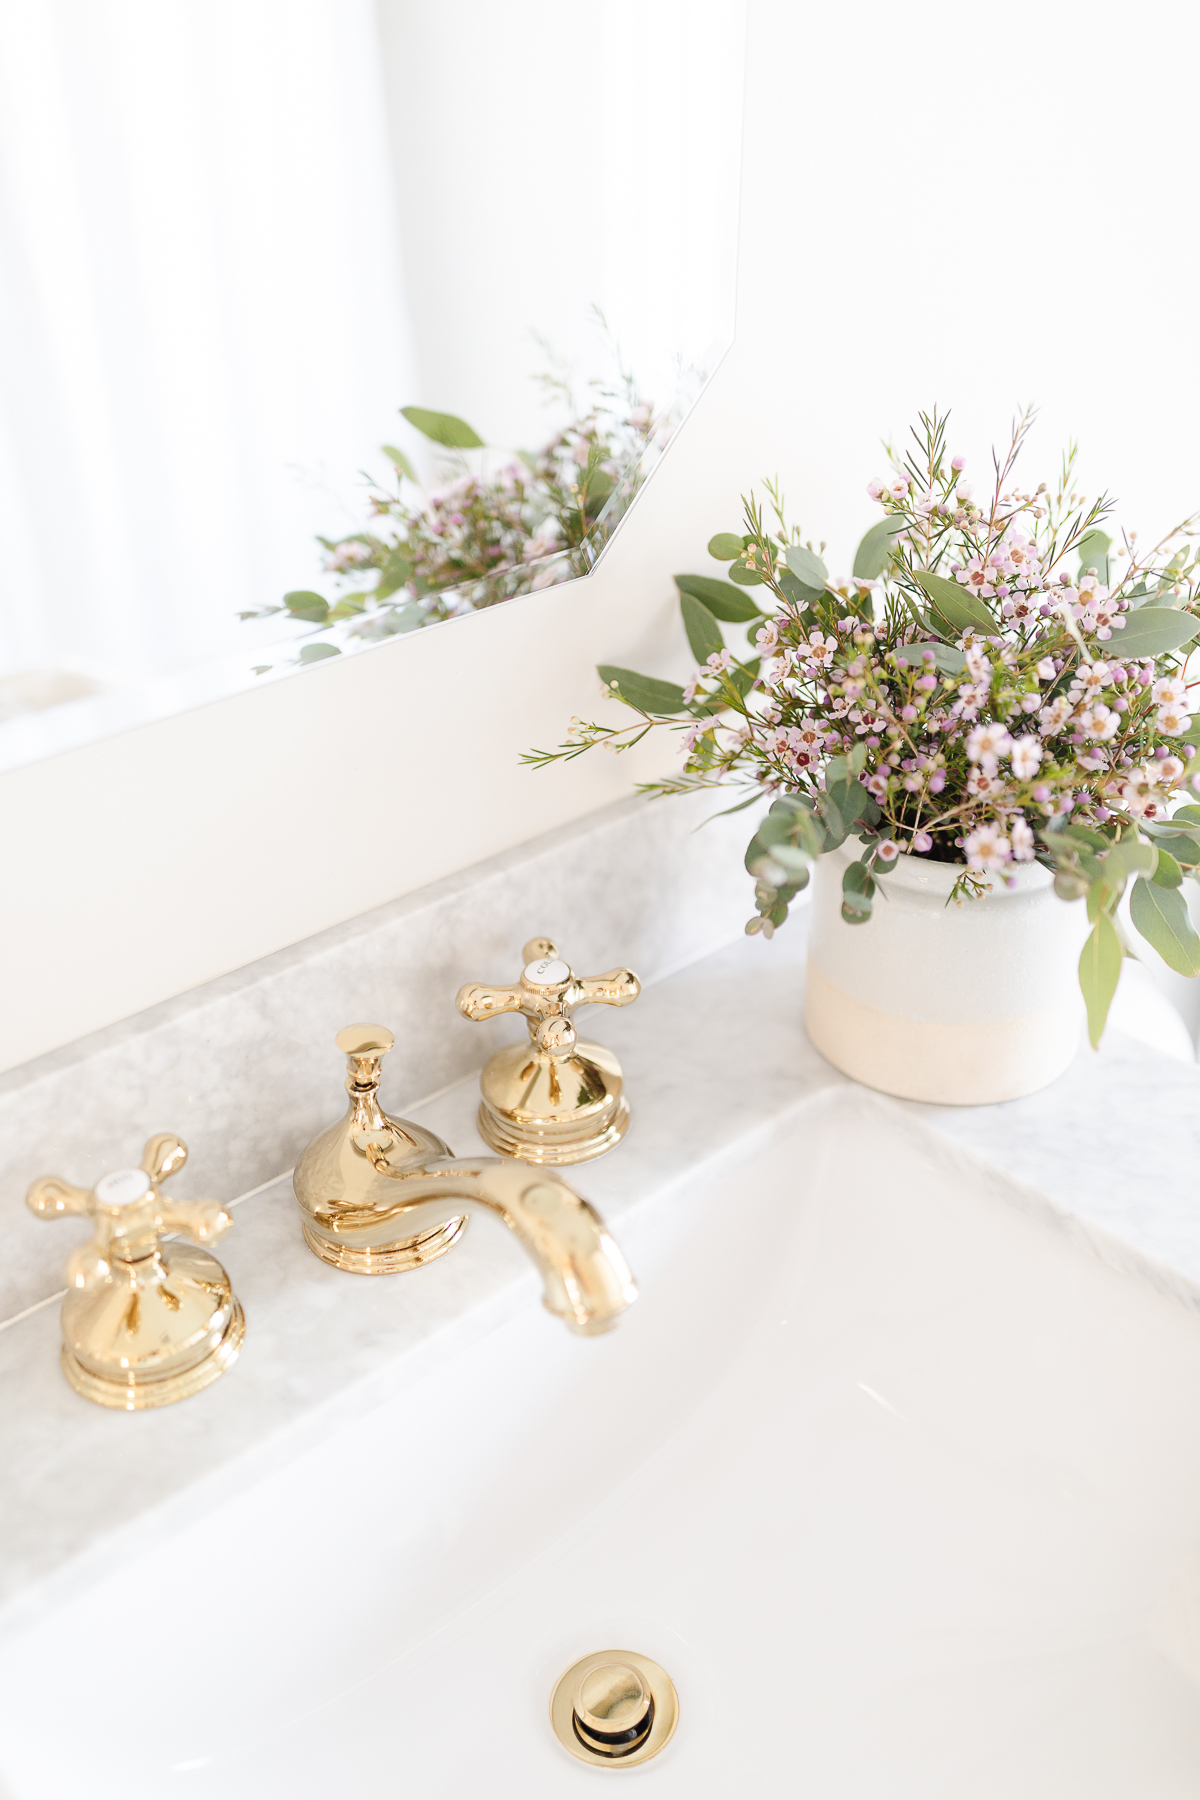 A bathroom sink with brass faucets and a potted plant.